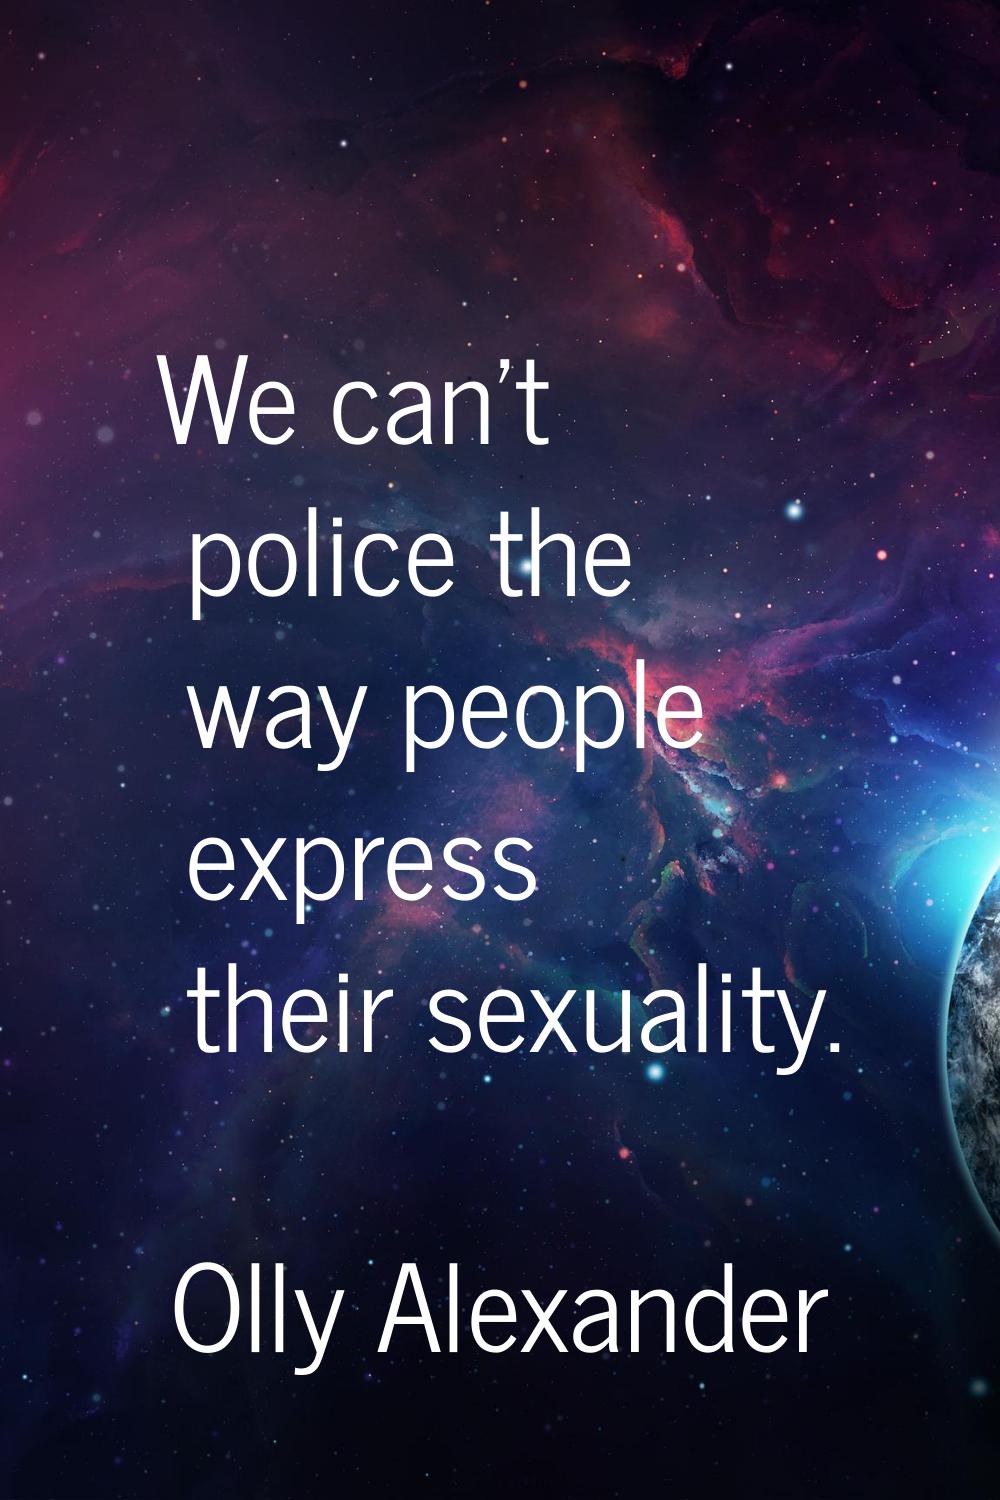 We can't police the way people express their sexuality.